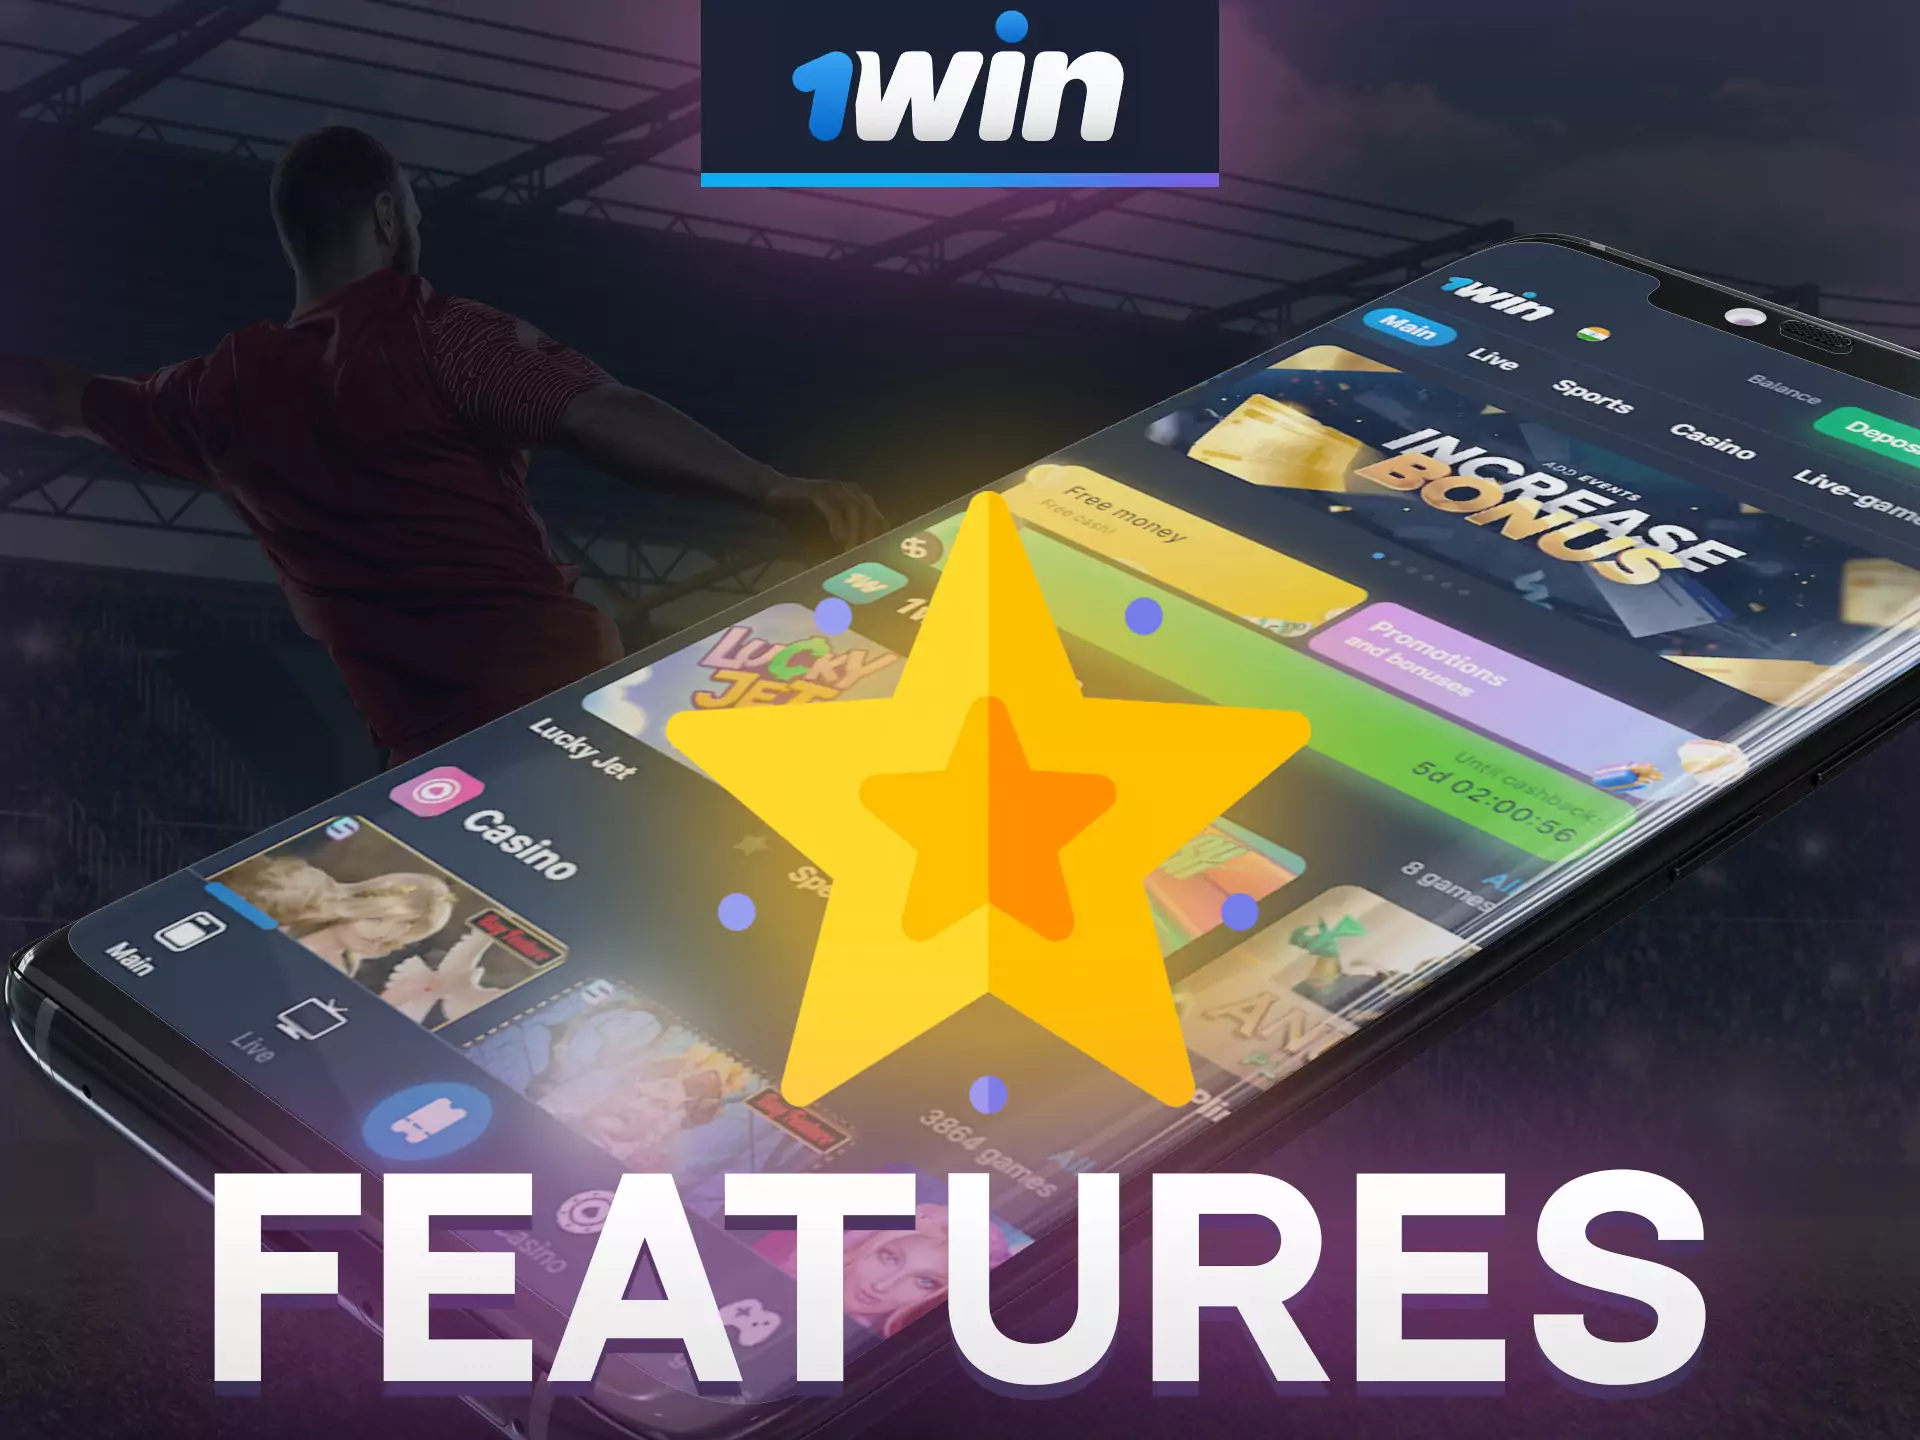 Learn more about 1win app features.